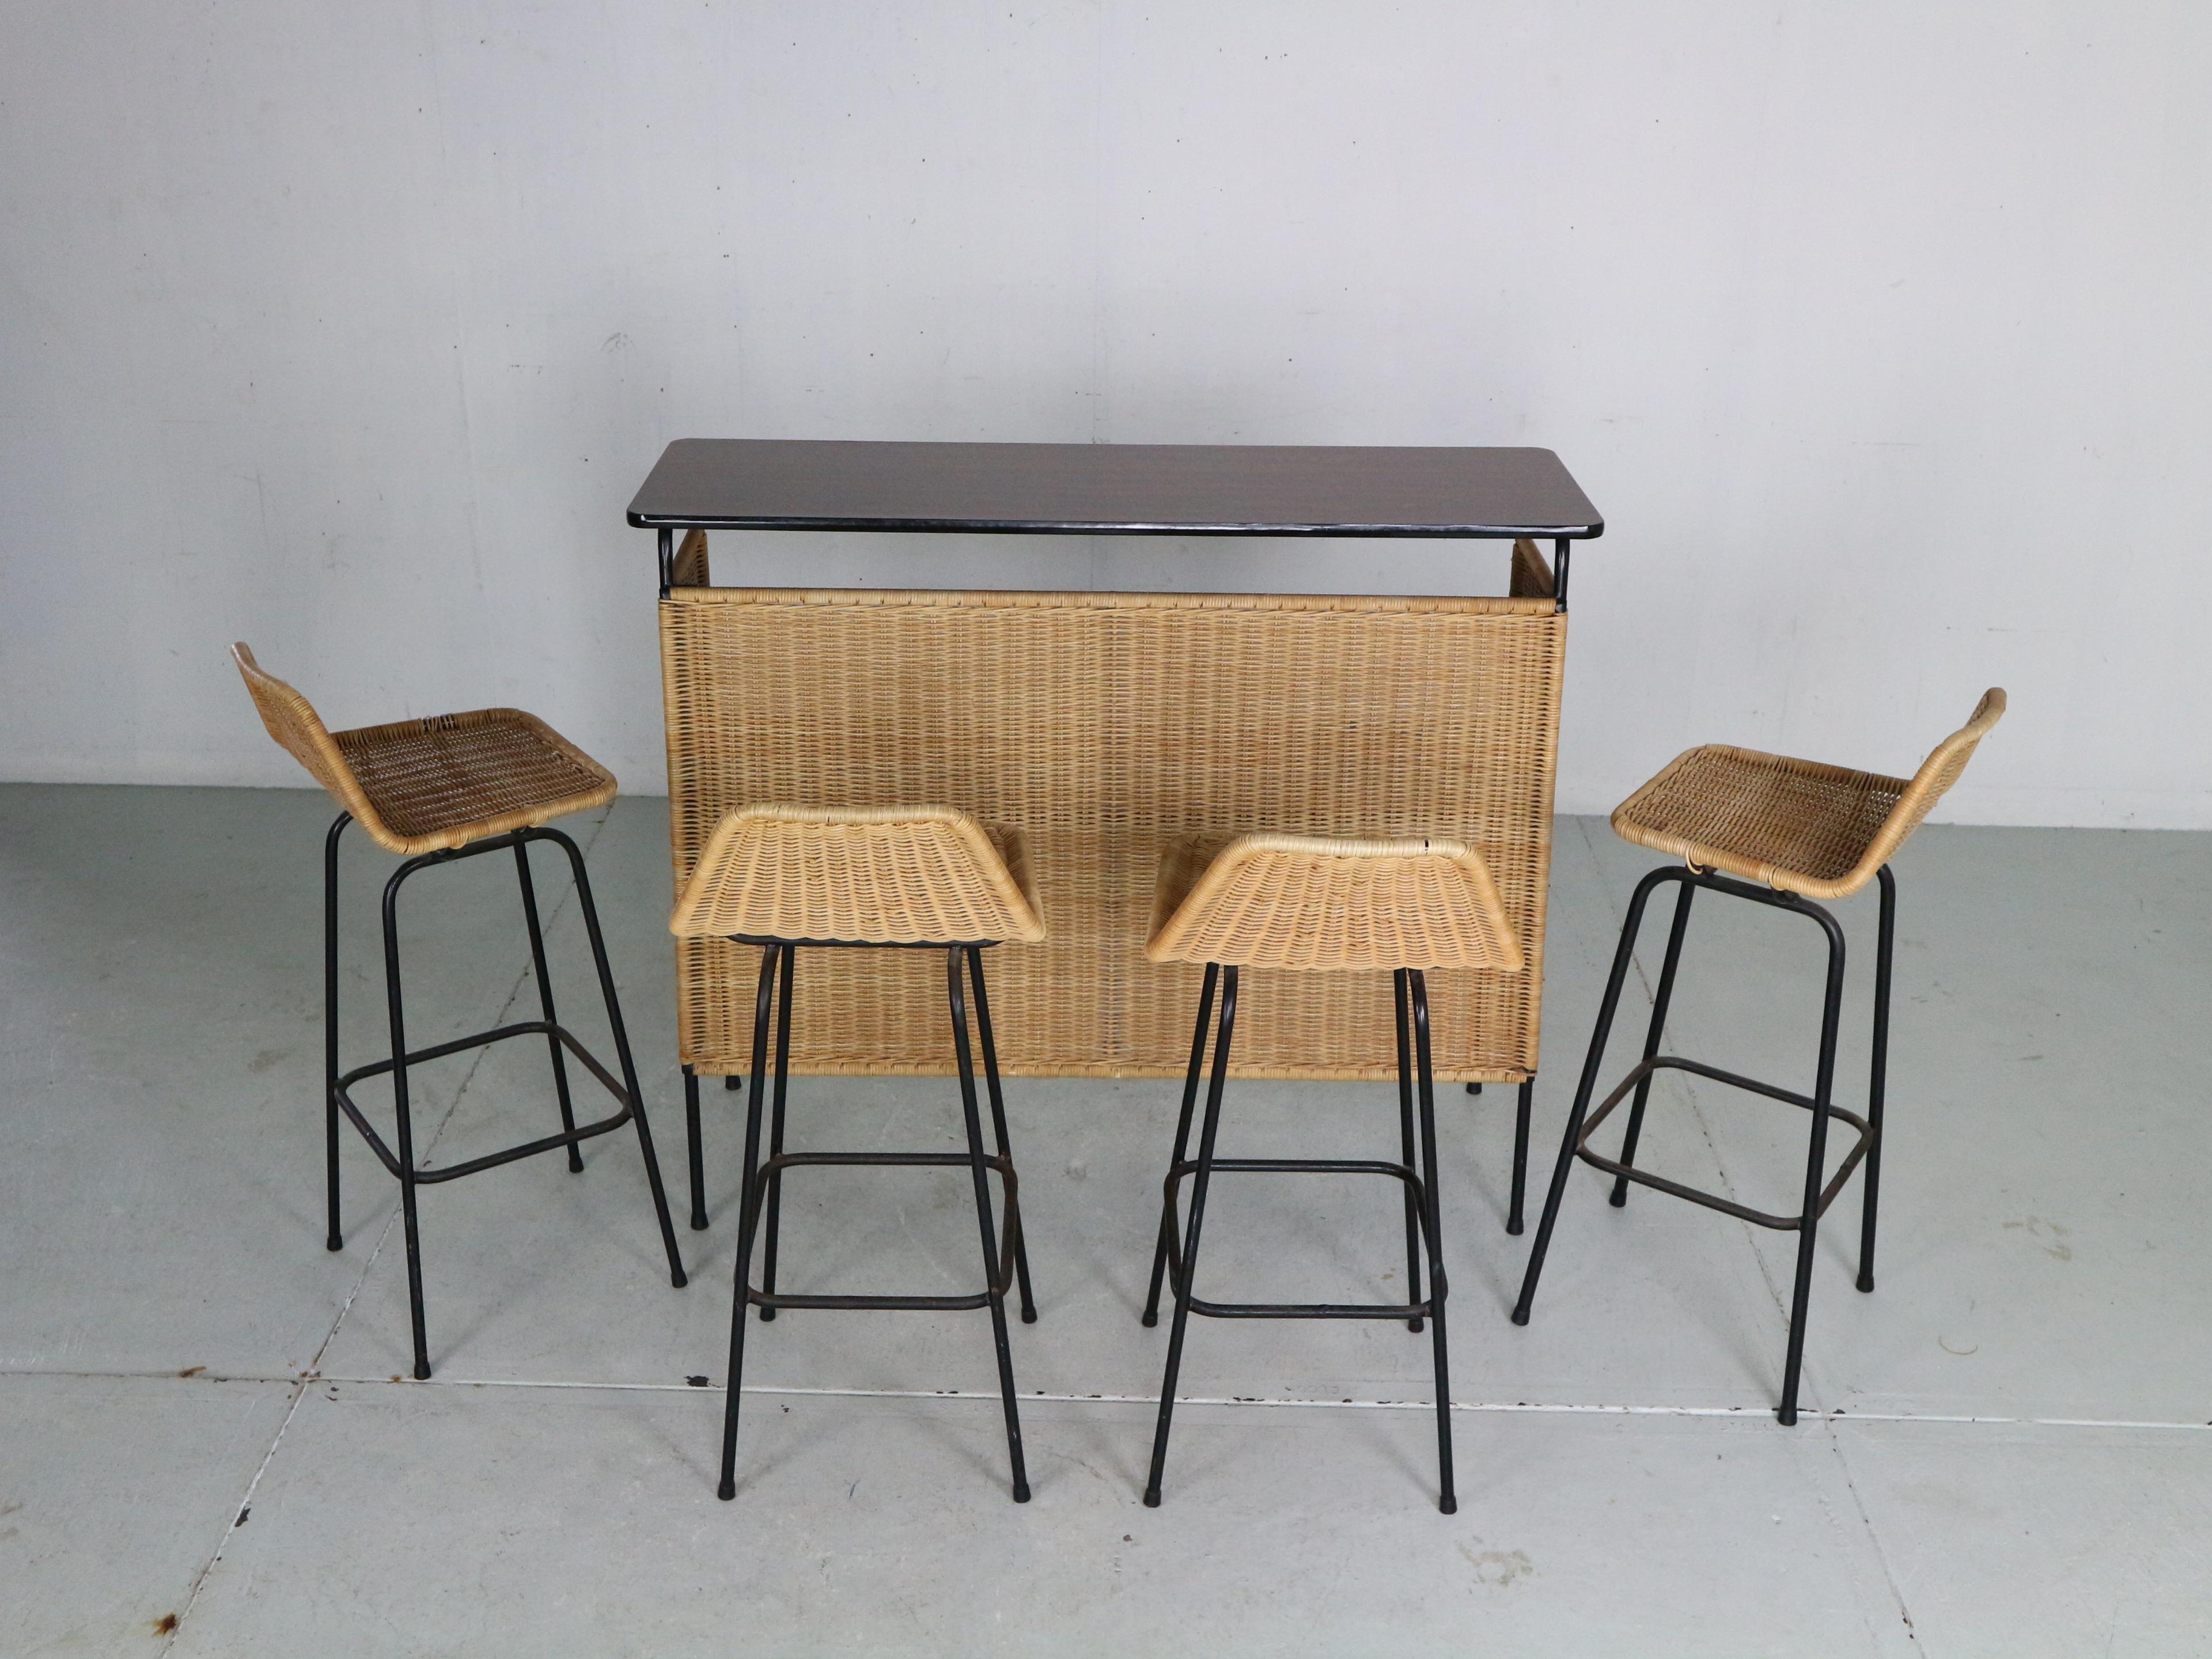 Vintage bar set including the whole bar and 4 bar chairs designed by famous Dutch furniture designer Rohe Noordwolde, 1960's The Netherlands.

The bar is made of the wicker rattan base on a black metal feet.
The two tops- the serving one and one